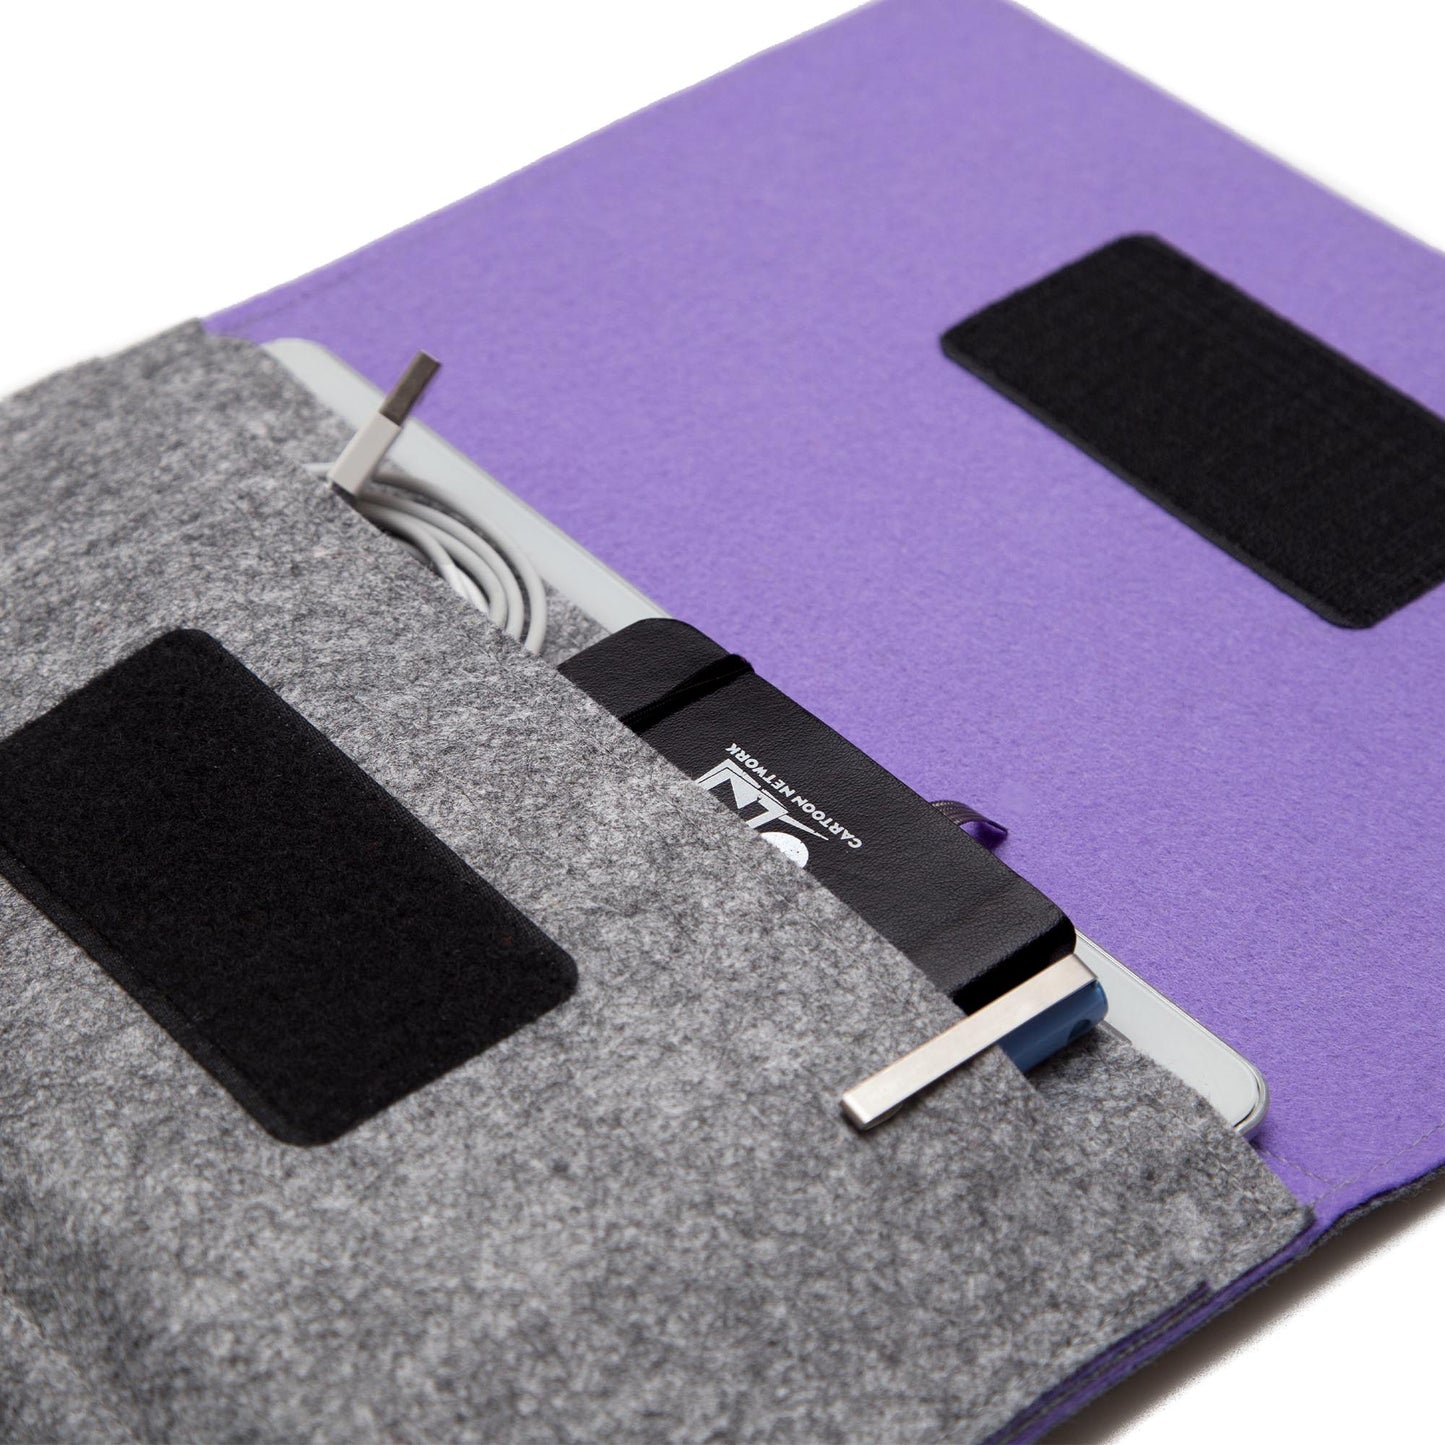 Premium Felt iPad Cover: Ultimate Protection with Accessories Pocket - Grey & Purple